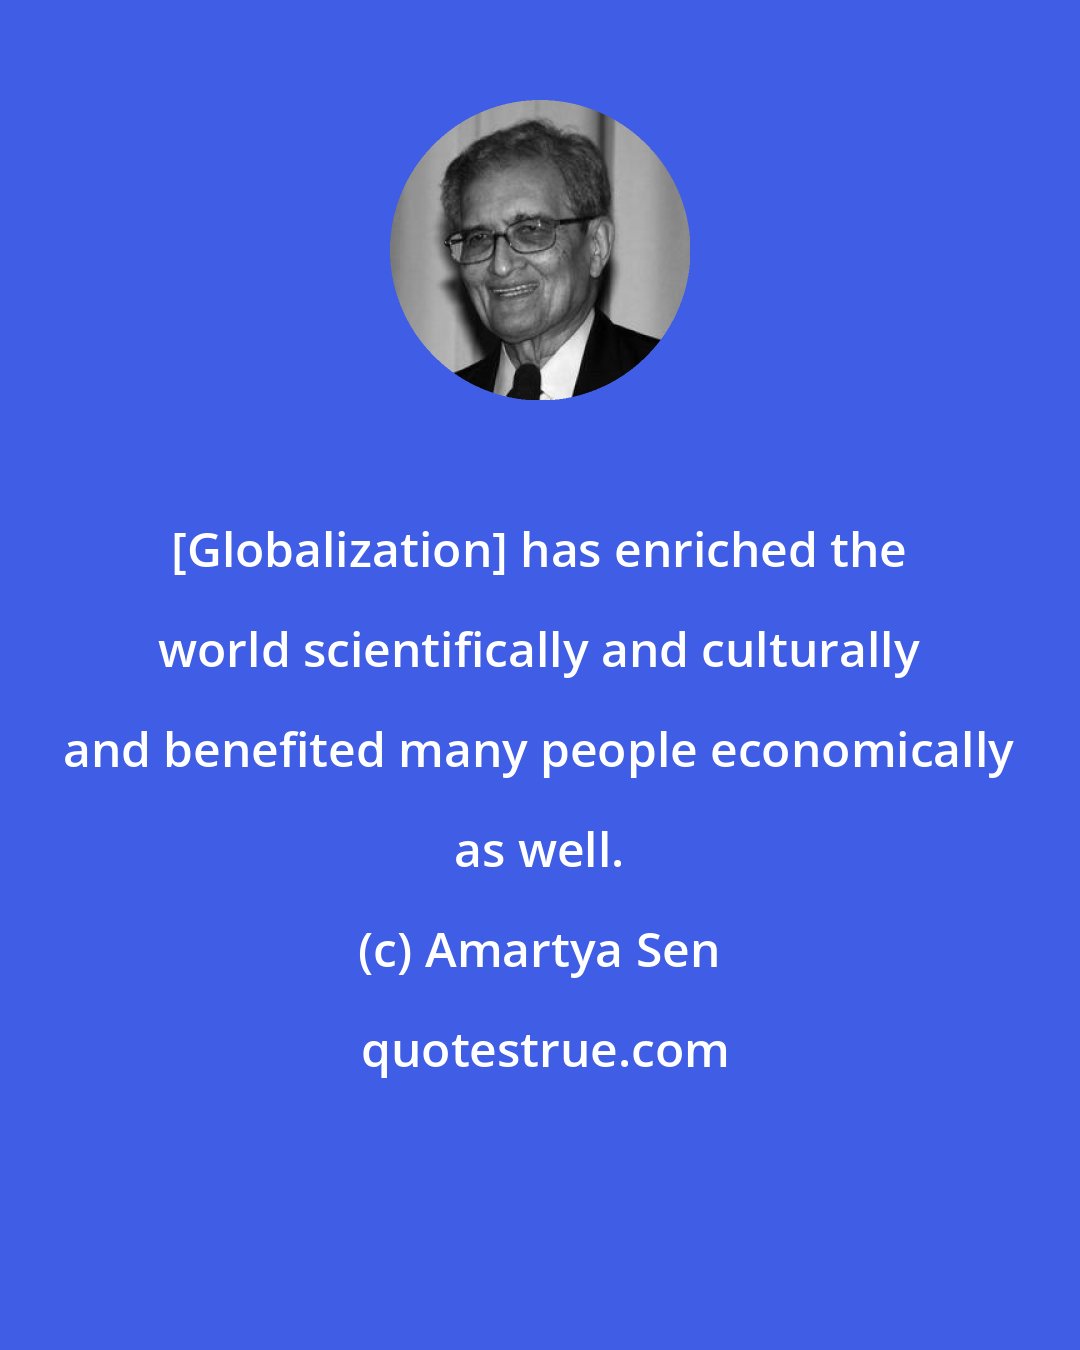 Amartya Sen: [Globalization] has enriched the world scientifically and culturally and benefited many people economically as well.